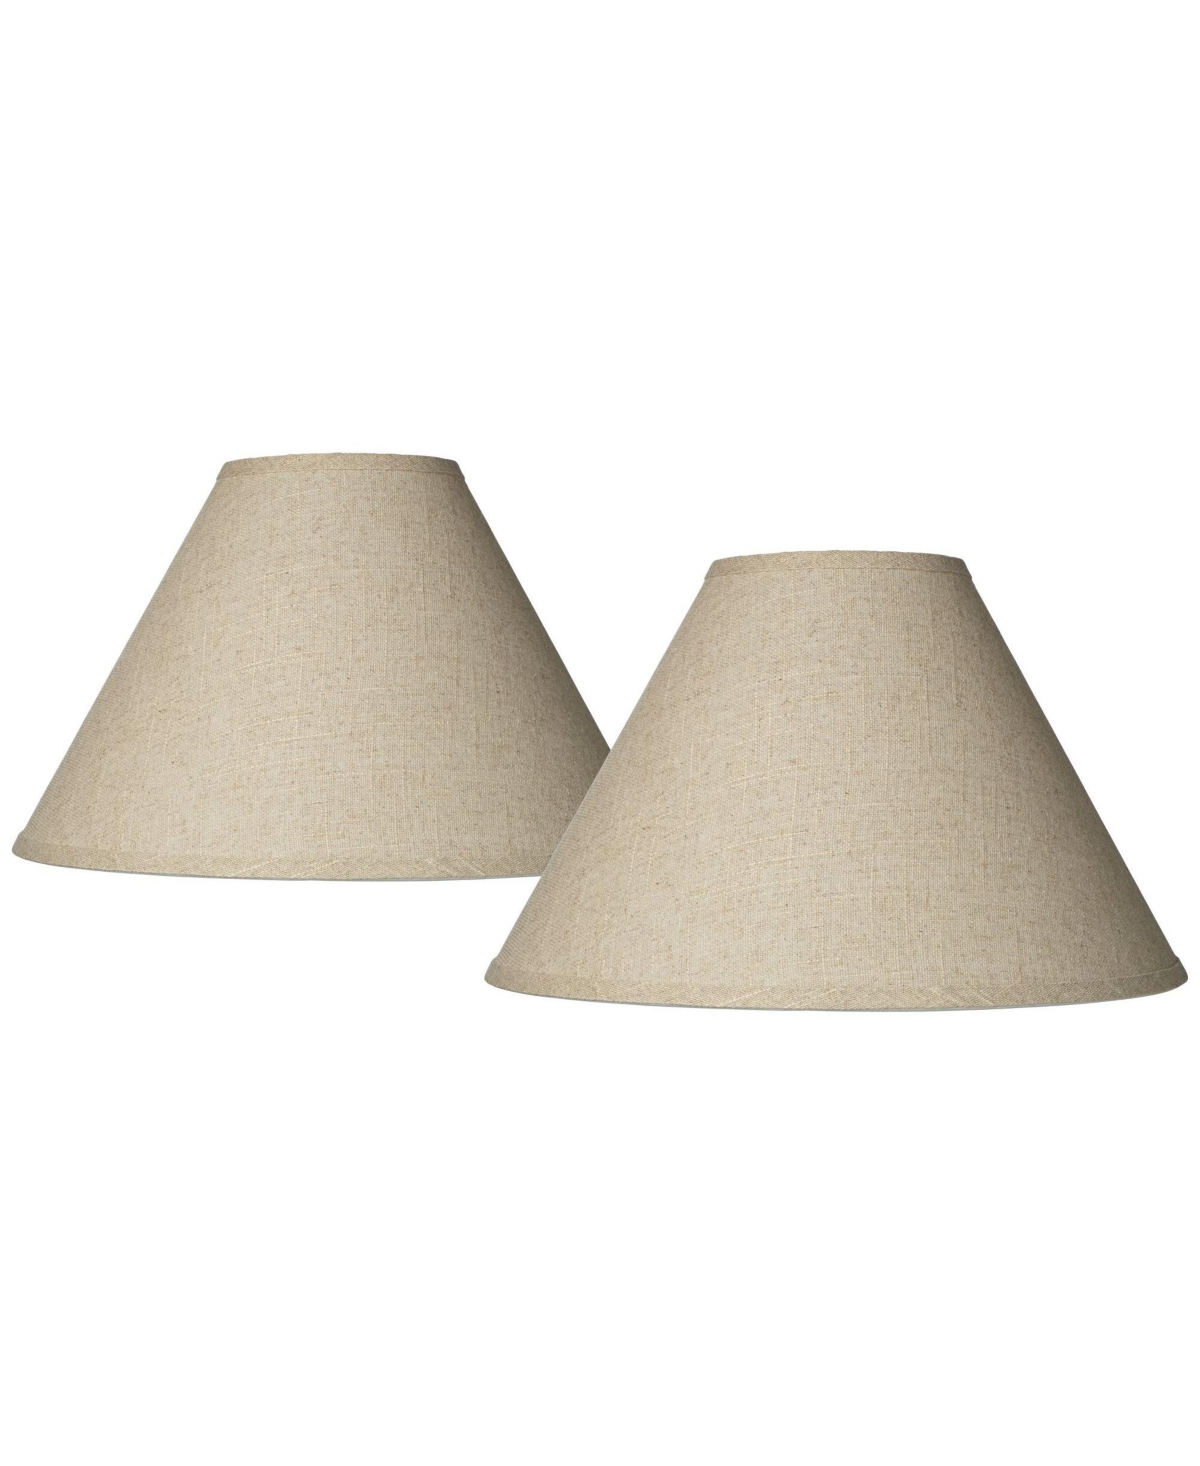 Springcrest Set Of 2 Empire Lamp Shades Fine Burlap Beige Large 6" Top X 17" Bottom X 11.5" High Spider With Rep In Brown